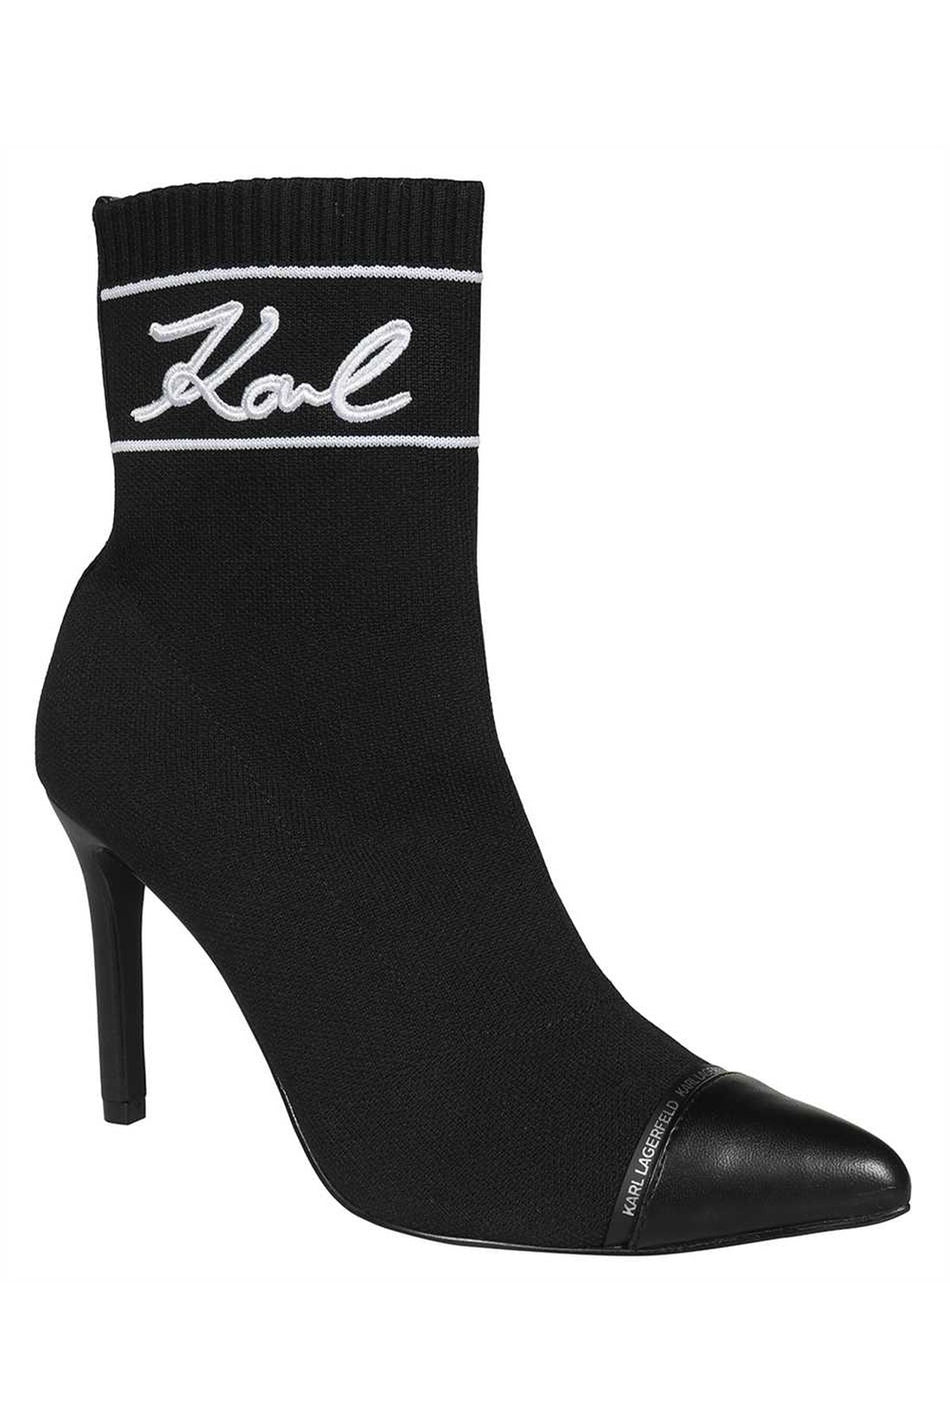 Sock ankle boots-Karl Lagerfeld-OUTLET-SALE-ARCHIVIST